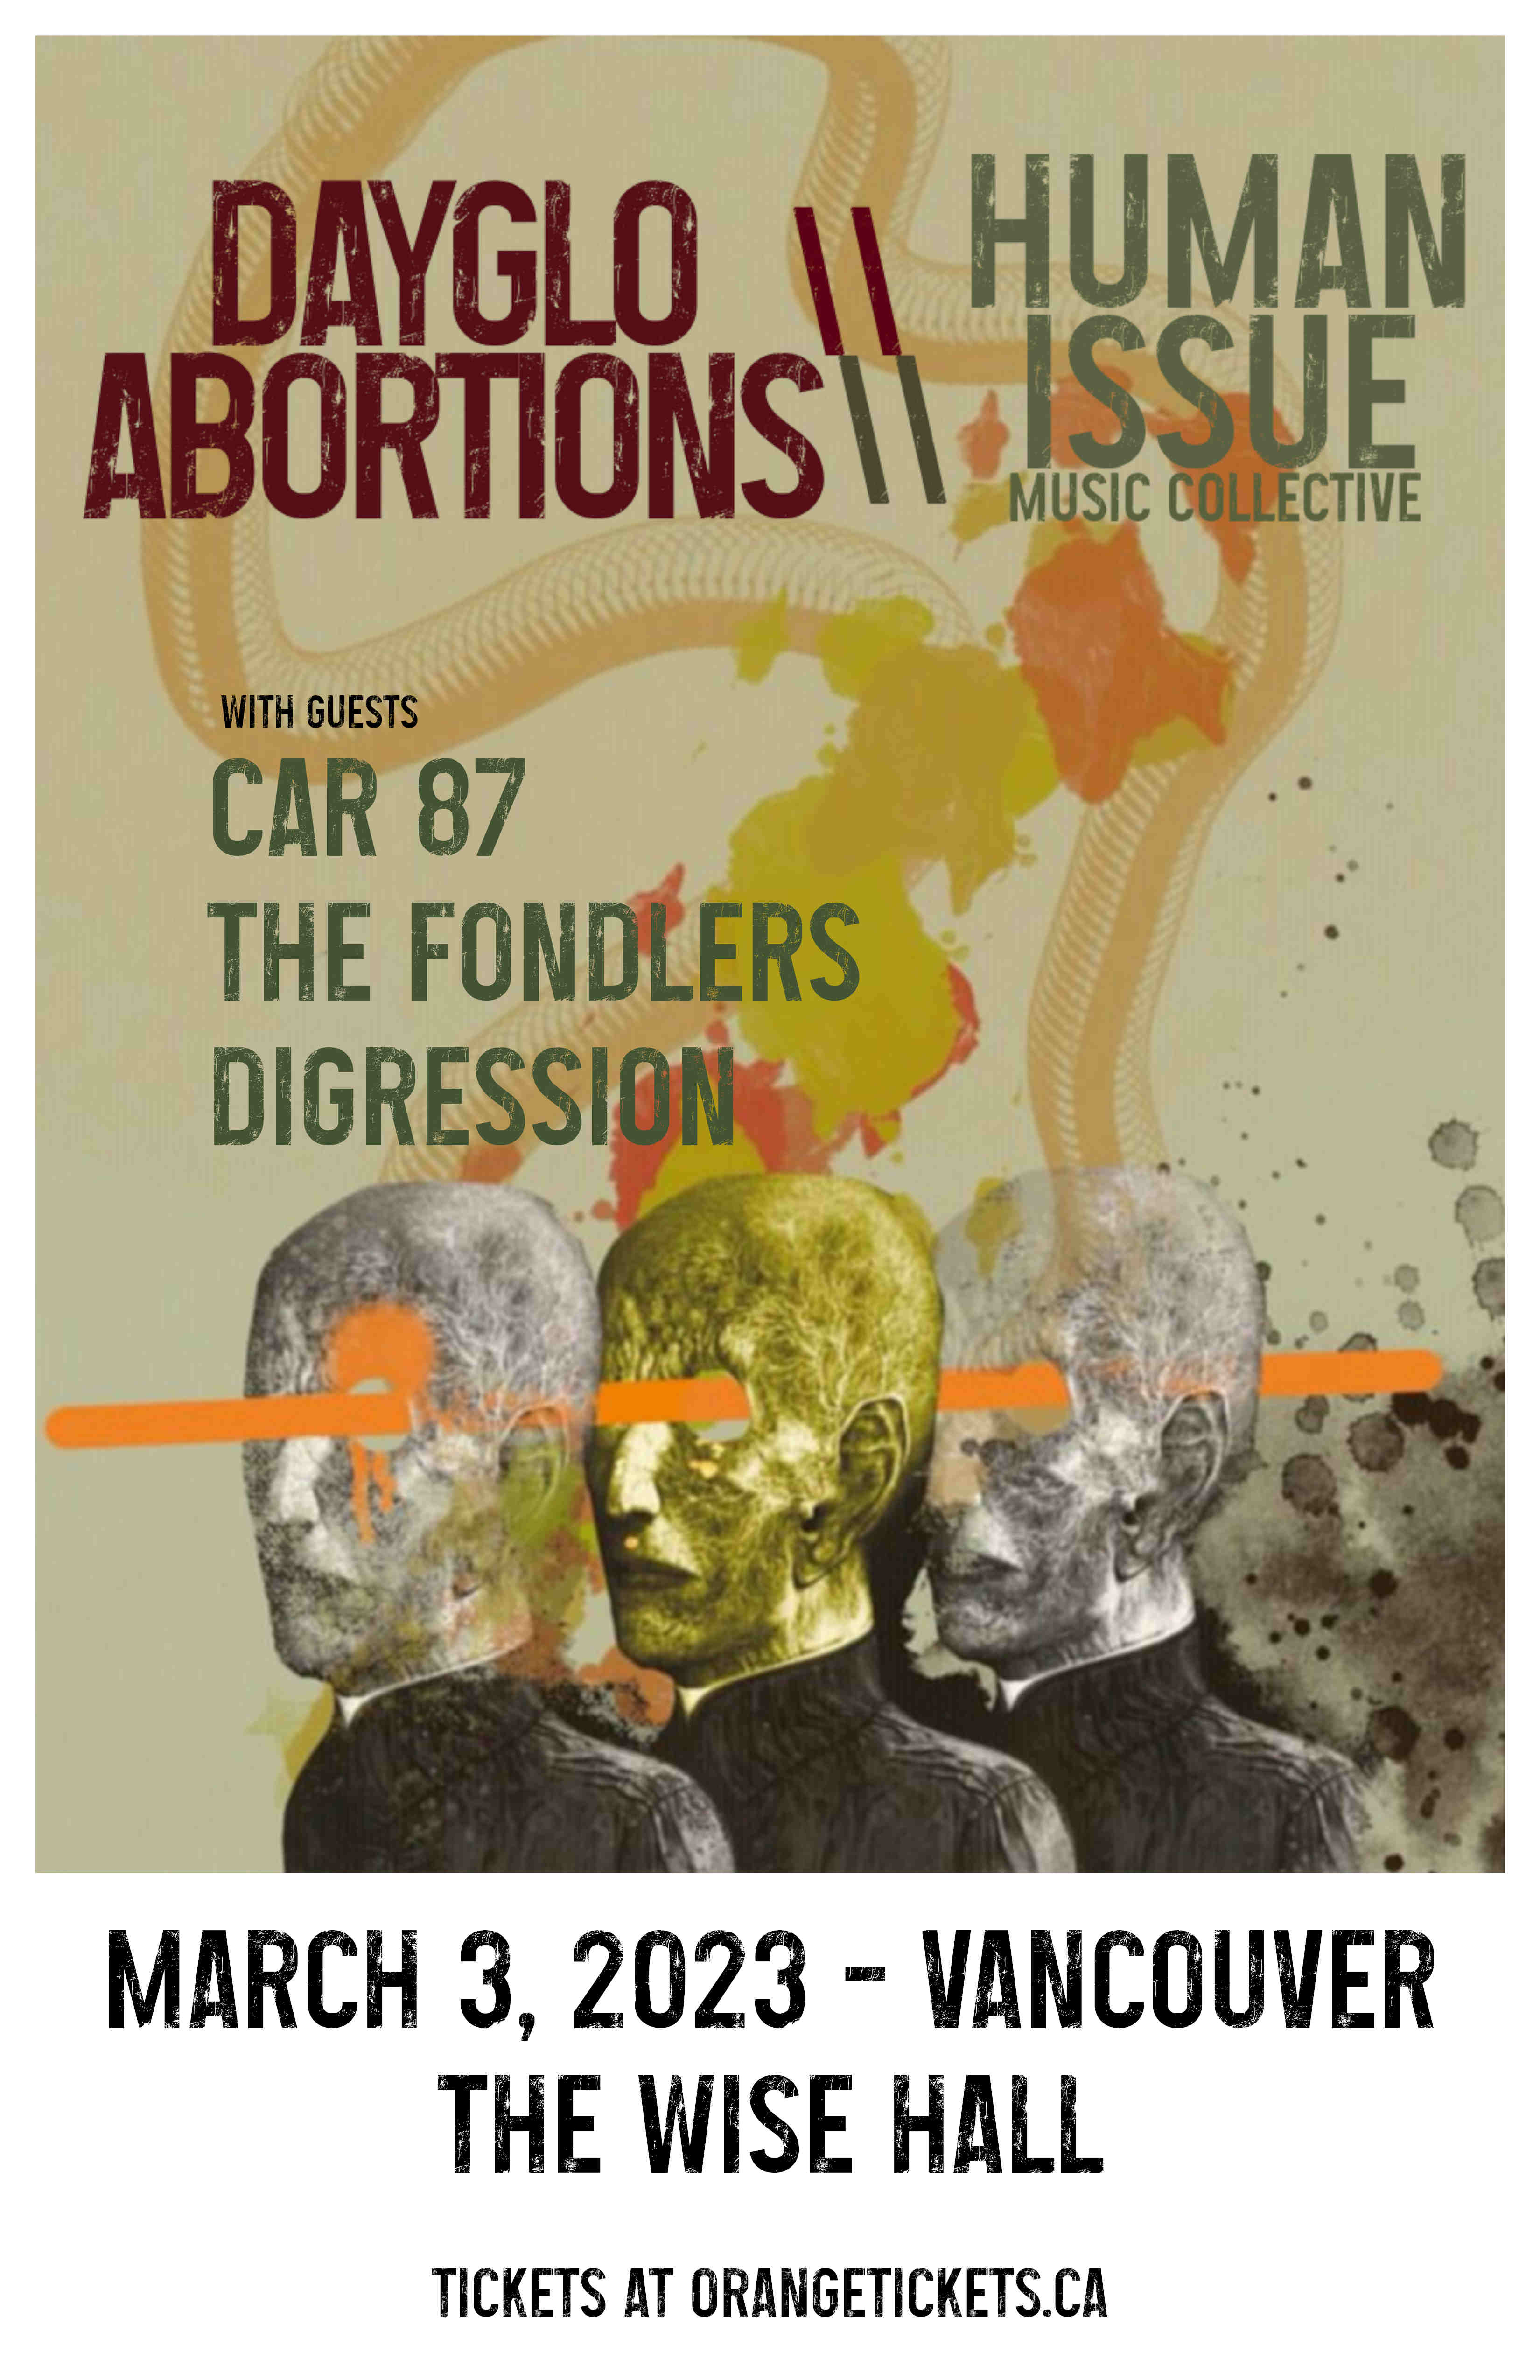 DAYGLO ABORTIONS and HUMAN ISSUE (Vancouver)